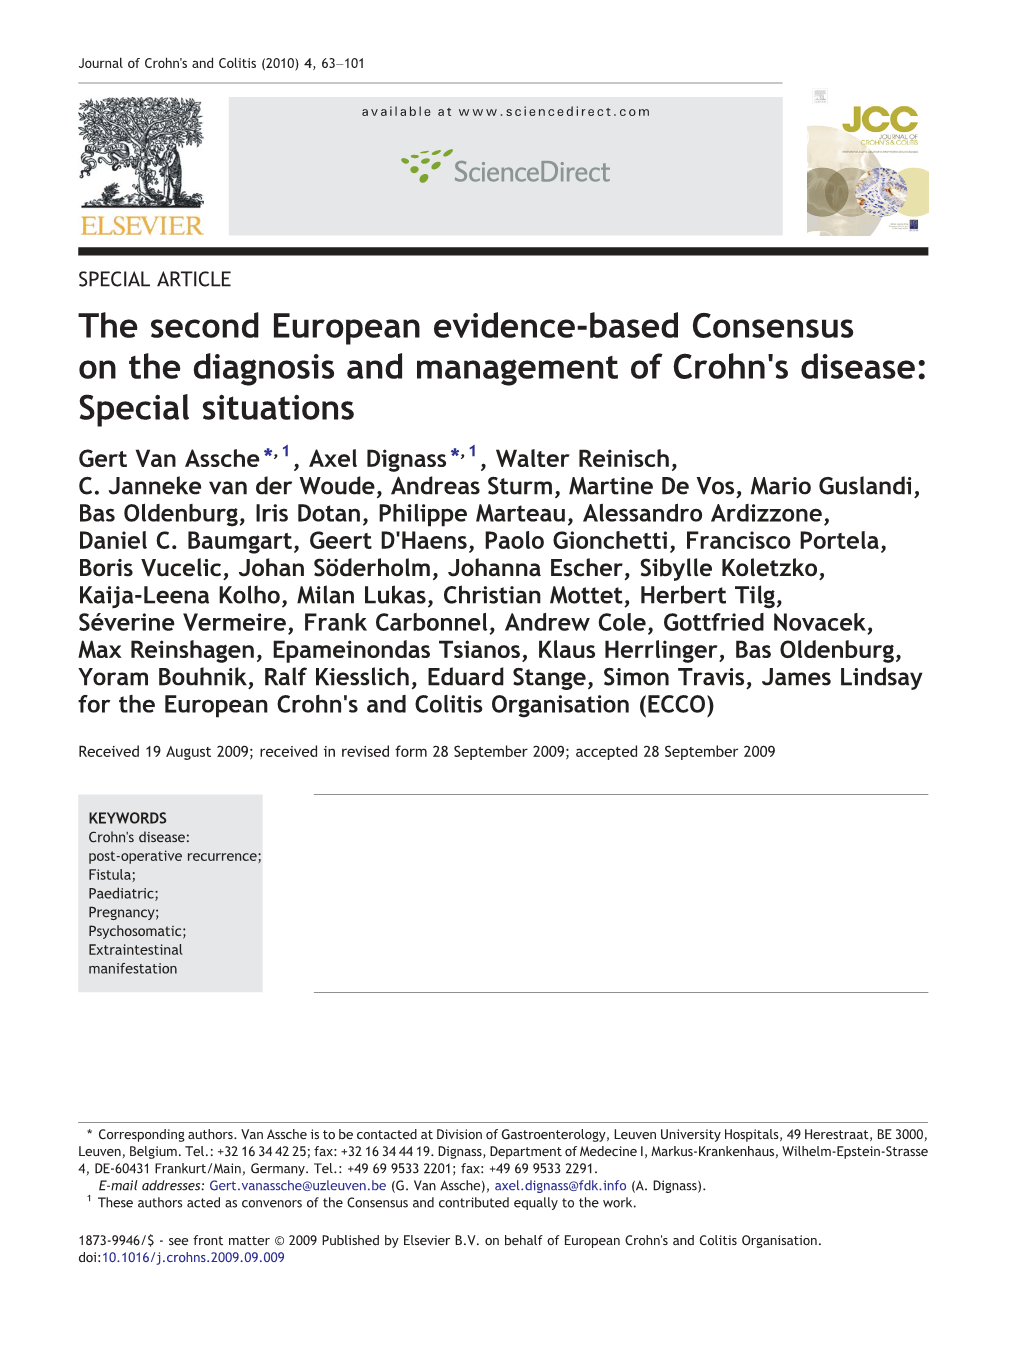 Pdf) for National There Are a Number of Uncontrolled Observational Reports Health Authorities to Develop Context Specific and Reliable on the Use of CAM in IBD